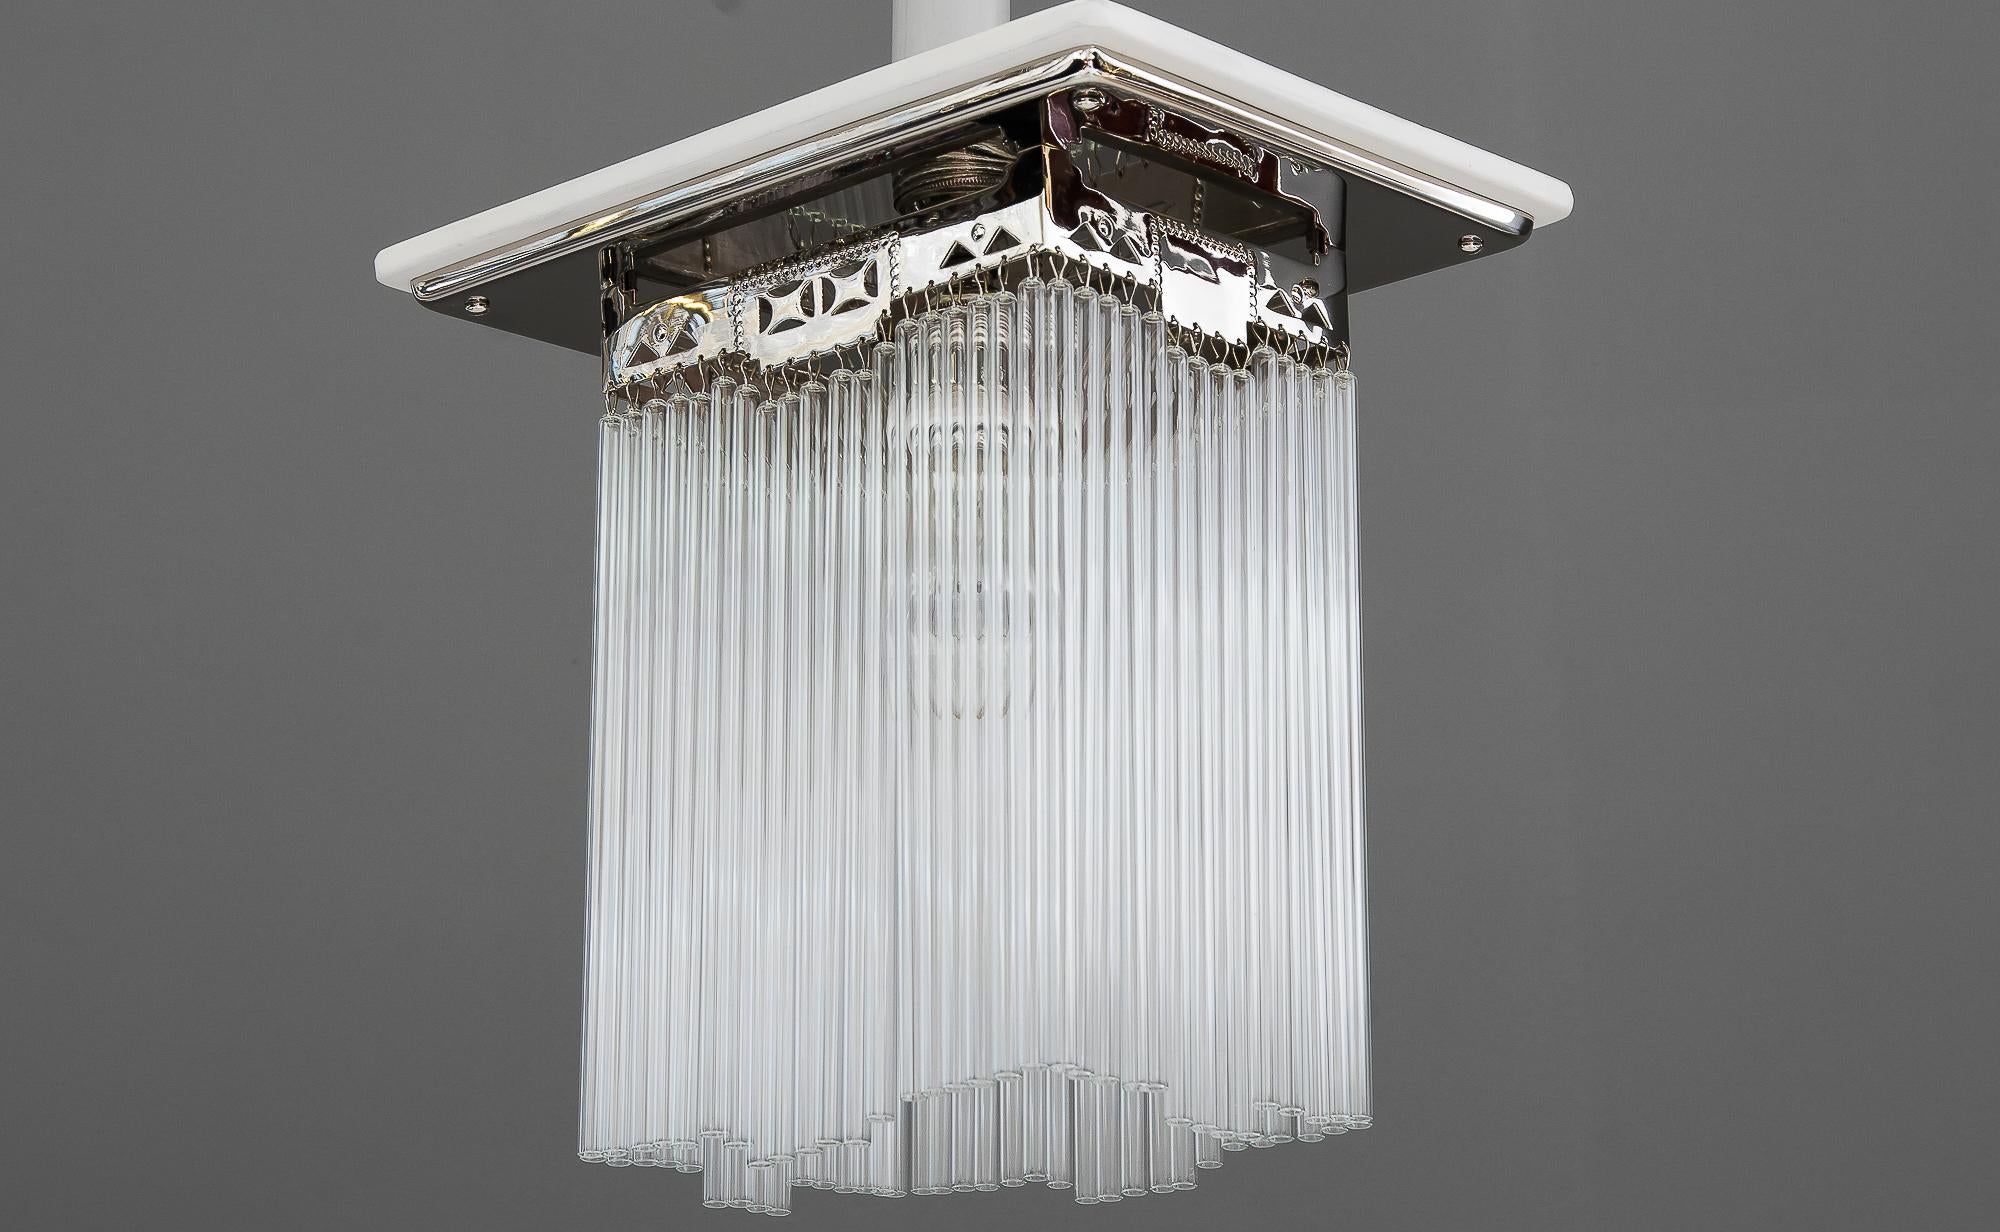 Art Deco ceiling lamp Vienna circa 1920s with white painted wood plate
Glass sticks are replaced (new).